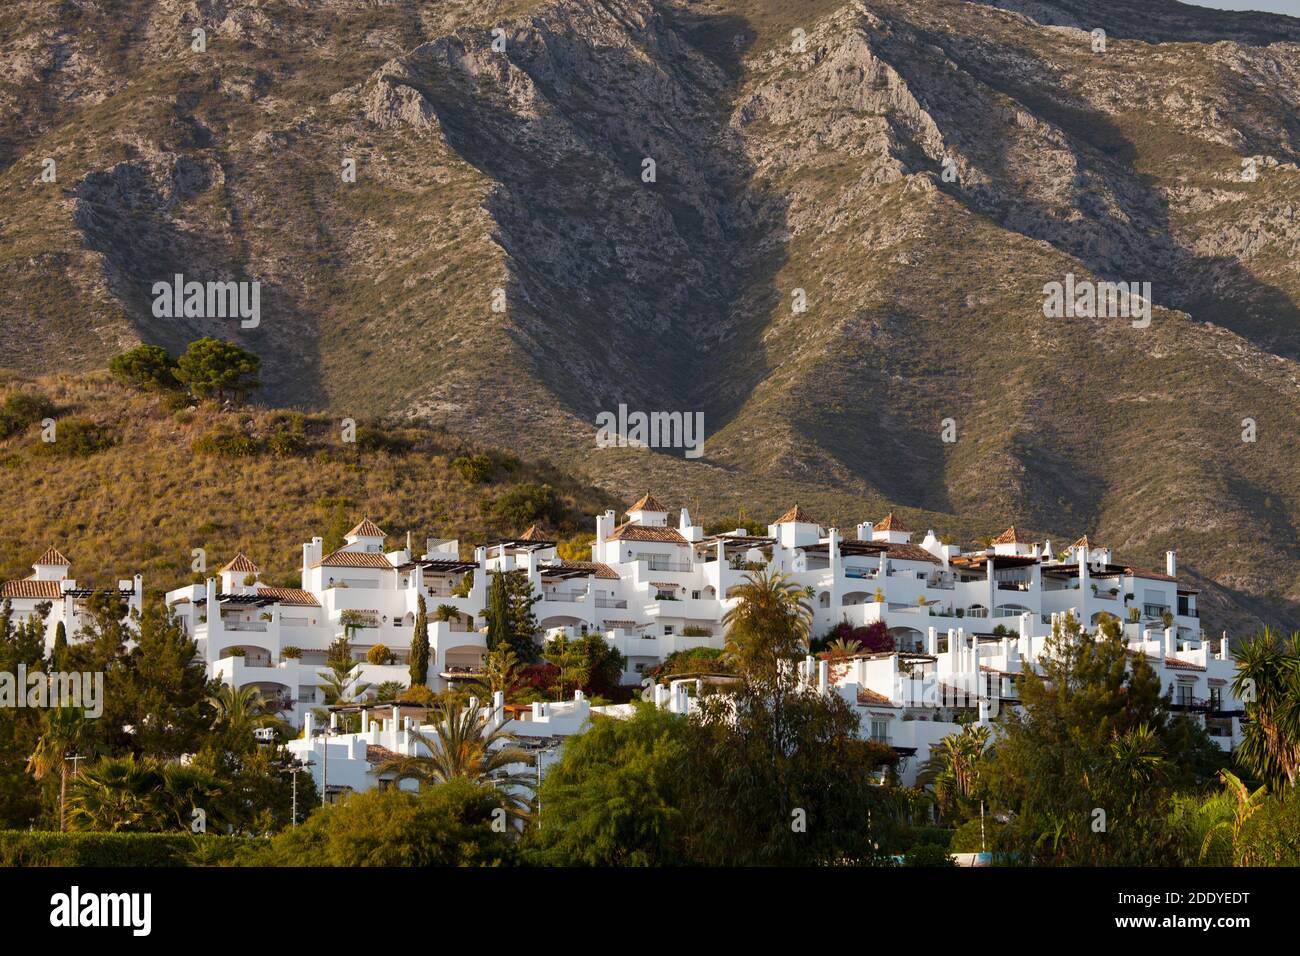 A new development in the mountains in the Rio Verde Valley near Puerto Banus in Spain Stock Photo